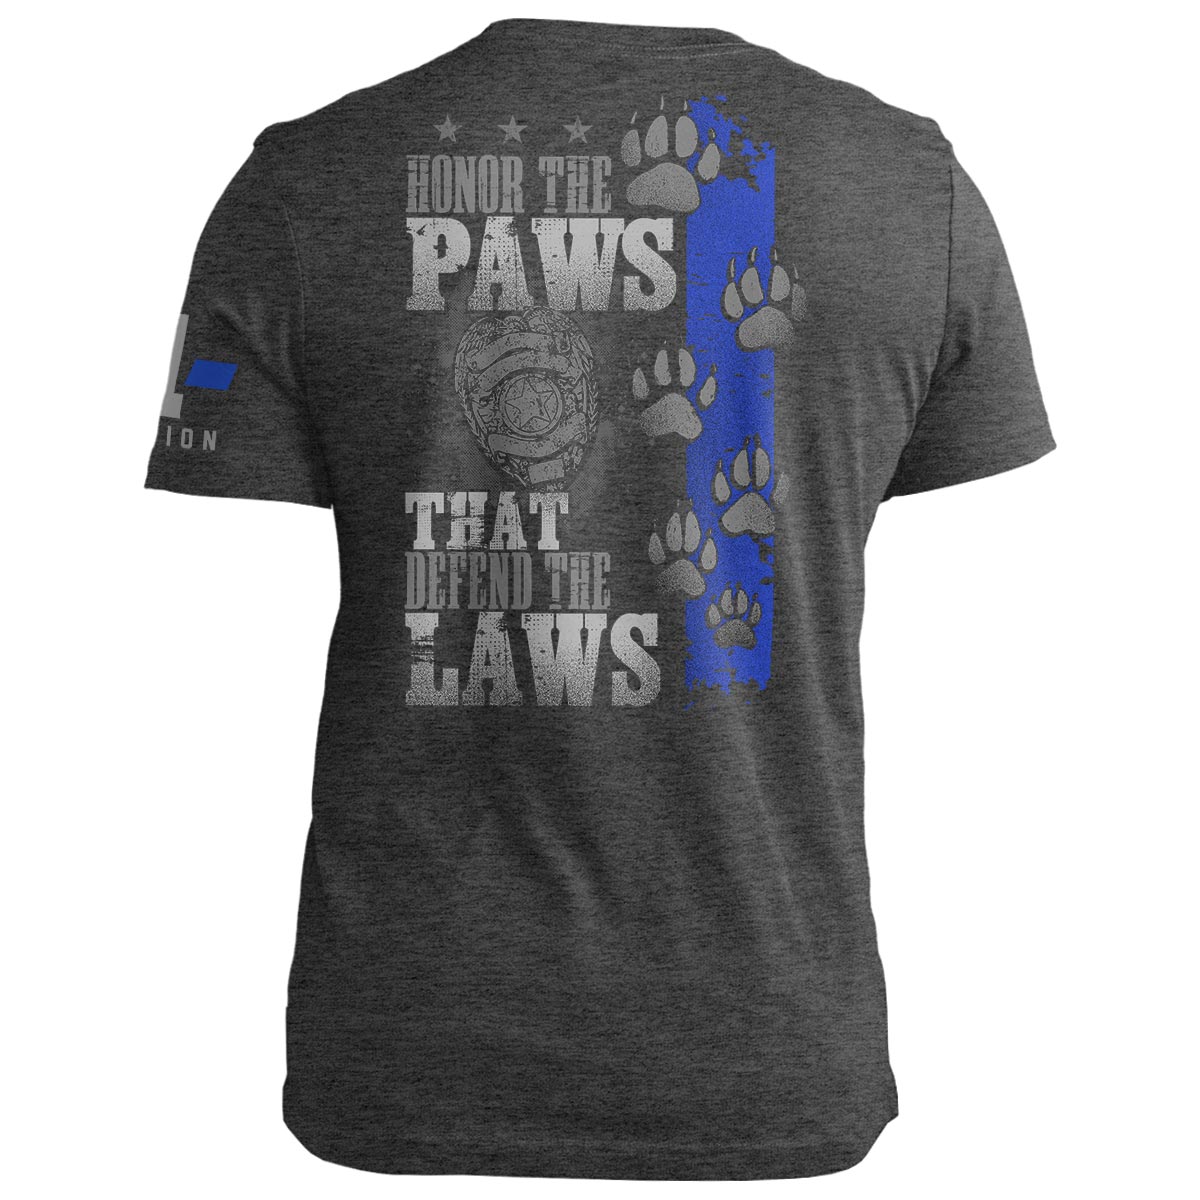 Honor the Paws that Defend the Laws